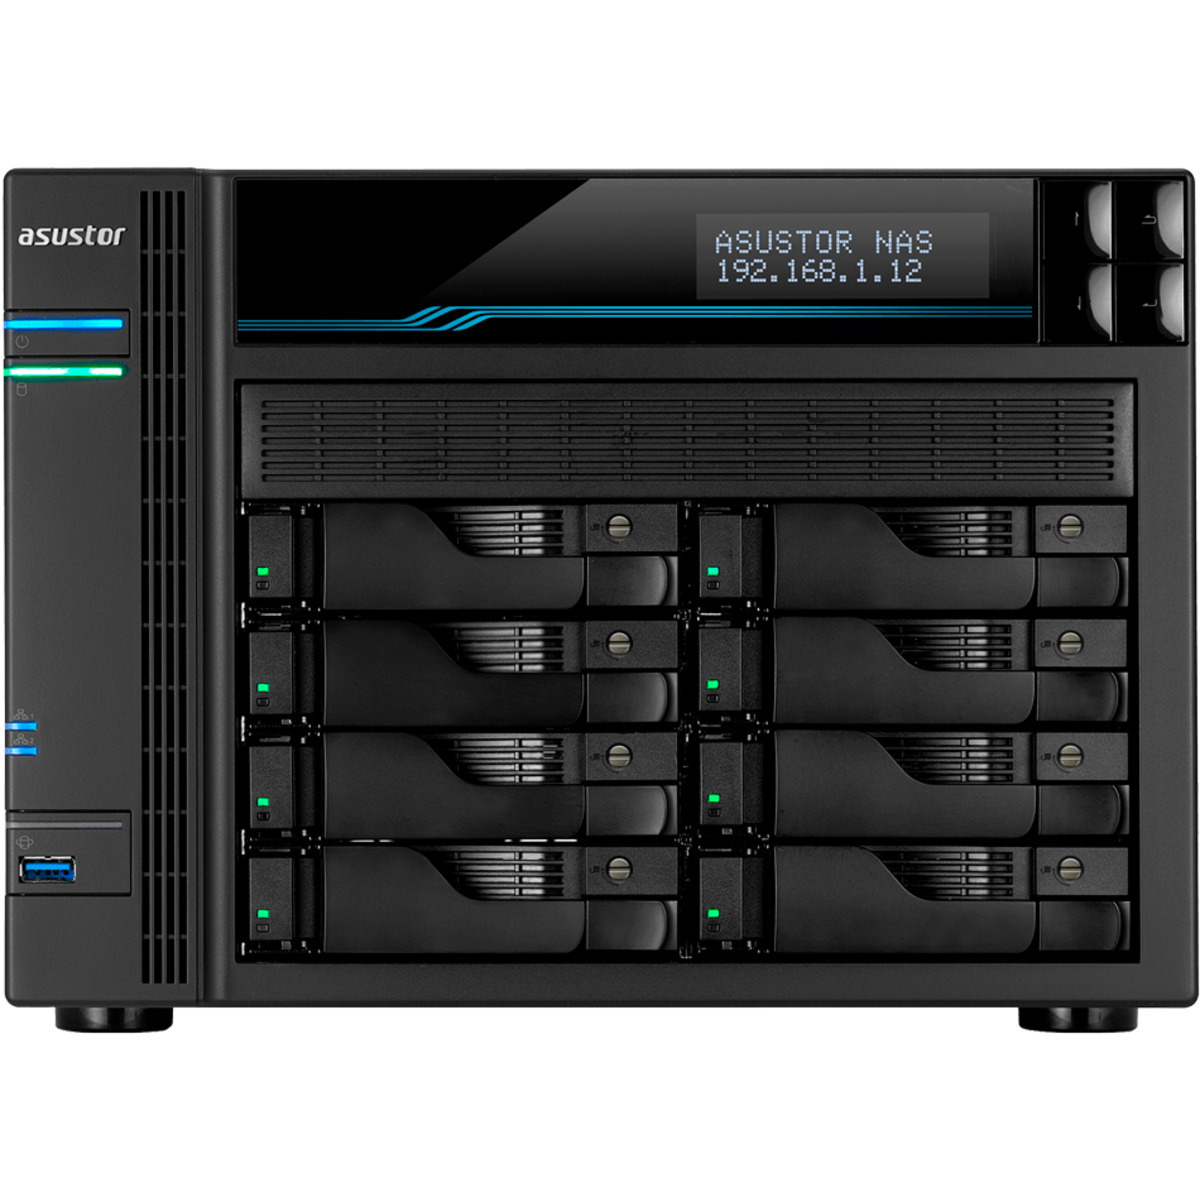 ASUSTOR AS6508T Lockerstor 8 96tb 8-Bay Desktop Multimedia / Power User / Business NAS - Network Attached Storage Device 8x12tb Seagate IronWolf Pro ST12000NT001 3.5 7200rpm SATA 6Gb/s HDD NAS Class Drives Installed - Burn-In Tested - ON SALE - FREE RAM UPGRADE AS6508T Lockerstor 8